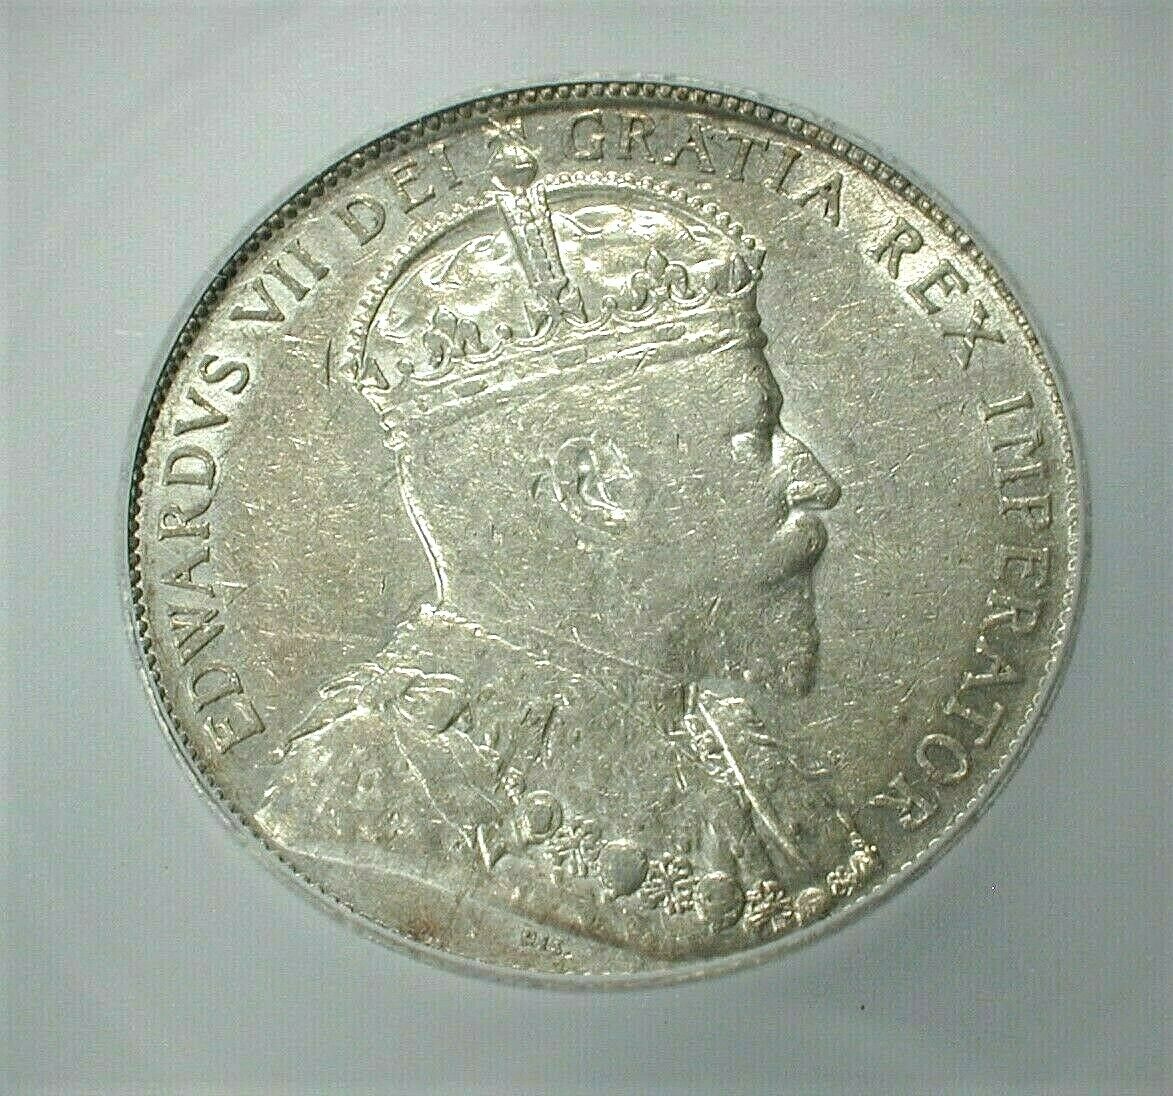 1910 Canada Silver 50 Cents Icg Au53 Condition Edwardian Leaves (007)